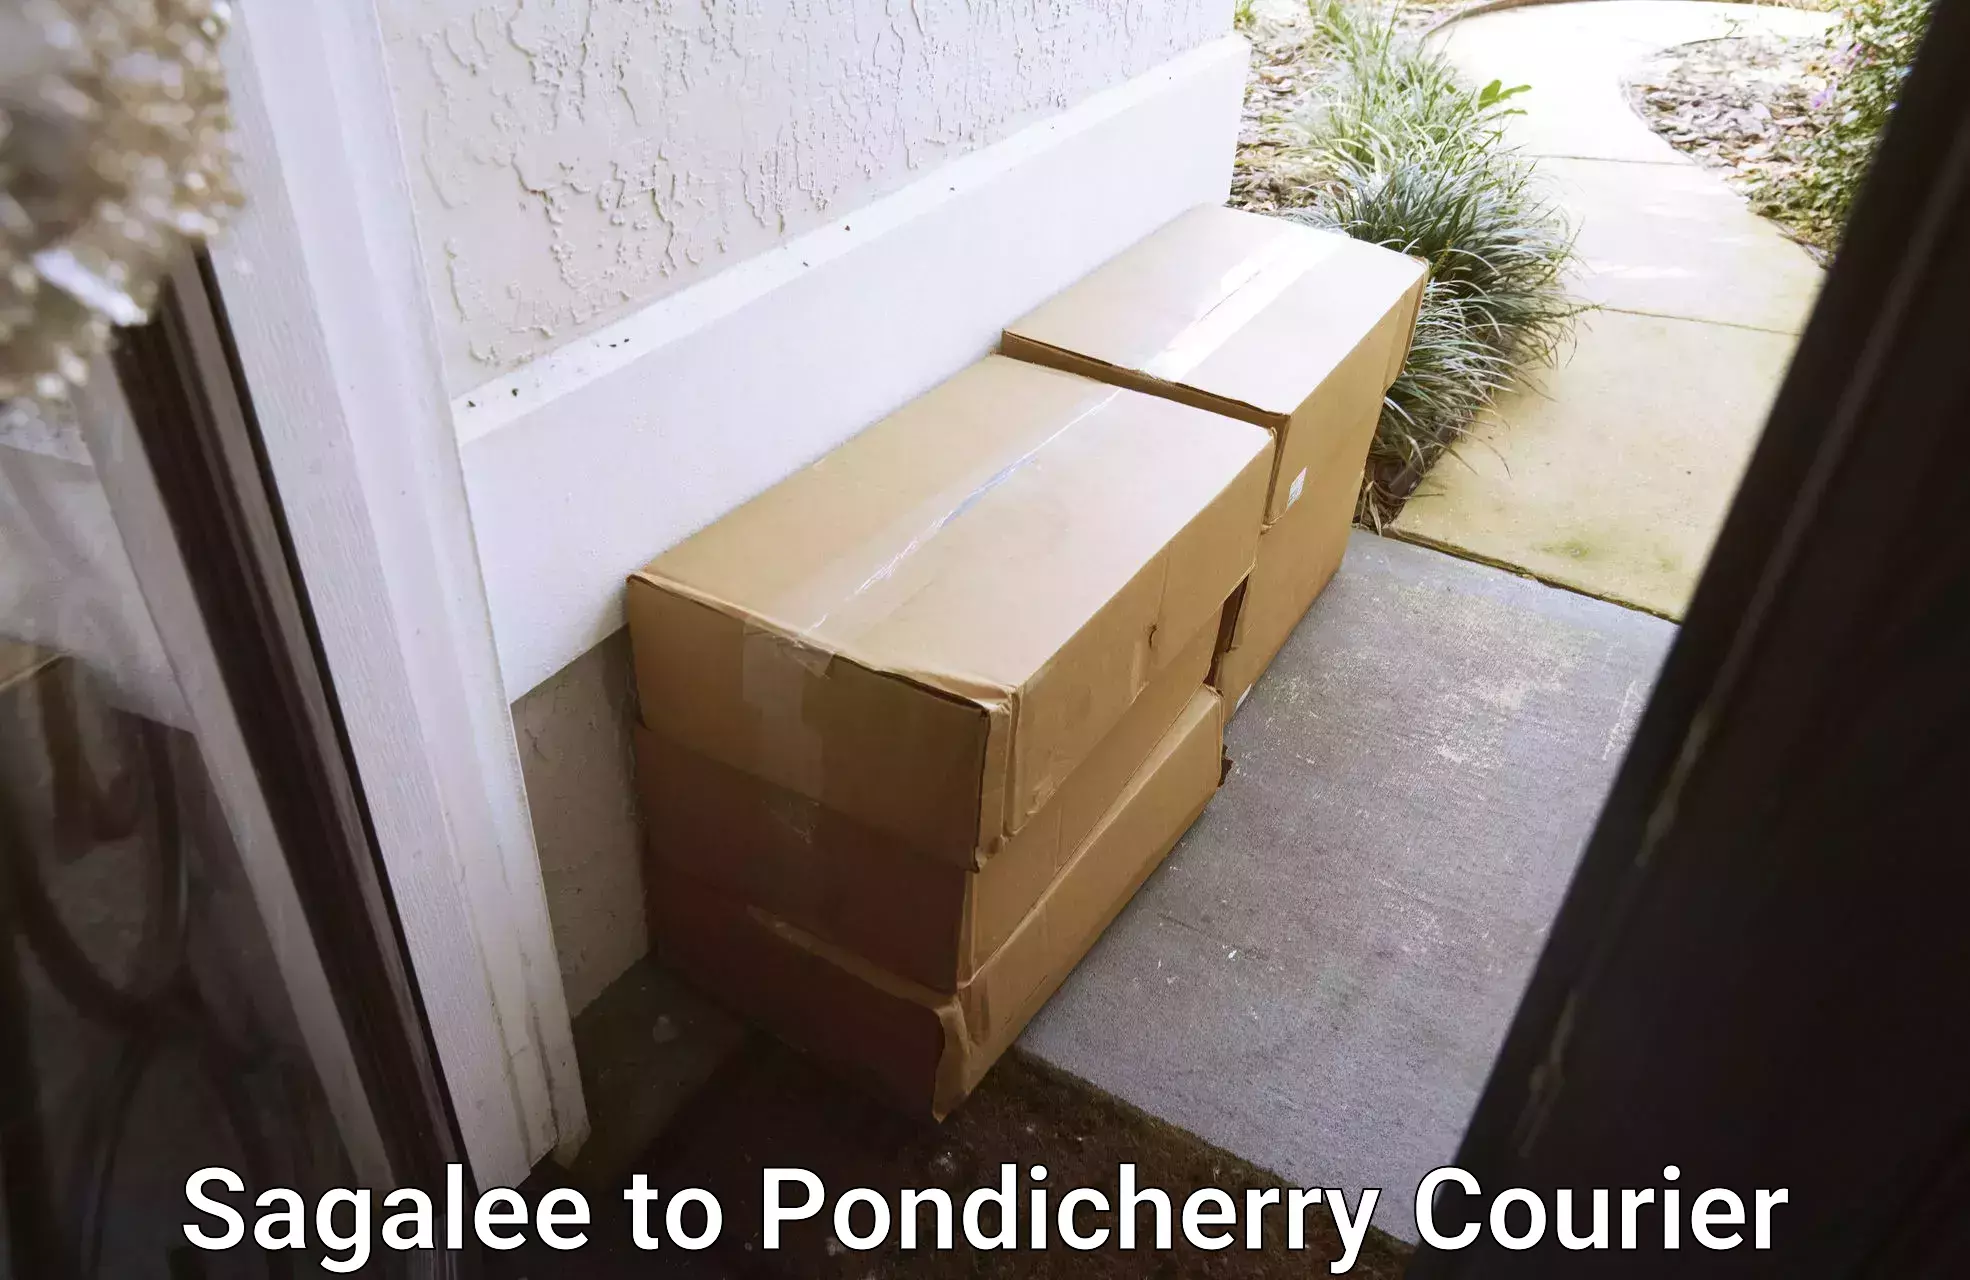 Online package tracking Sagalee to Pondicherry